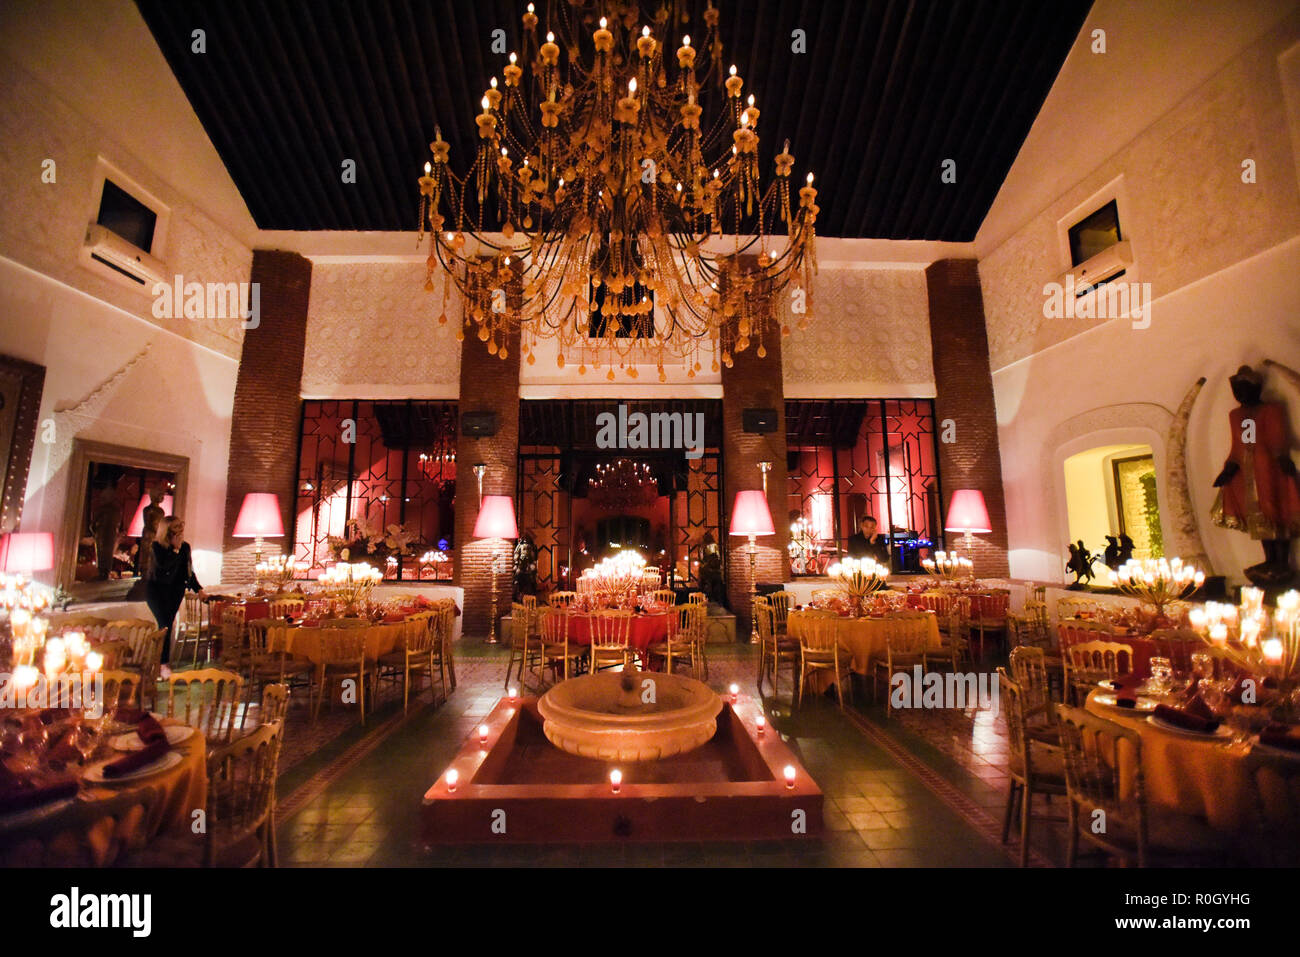 Interior view of a five star hotel restaurant by night in  Tensift al haouz in Marrakesh Morocco Stock Photo